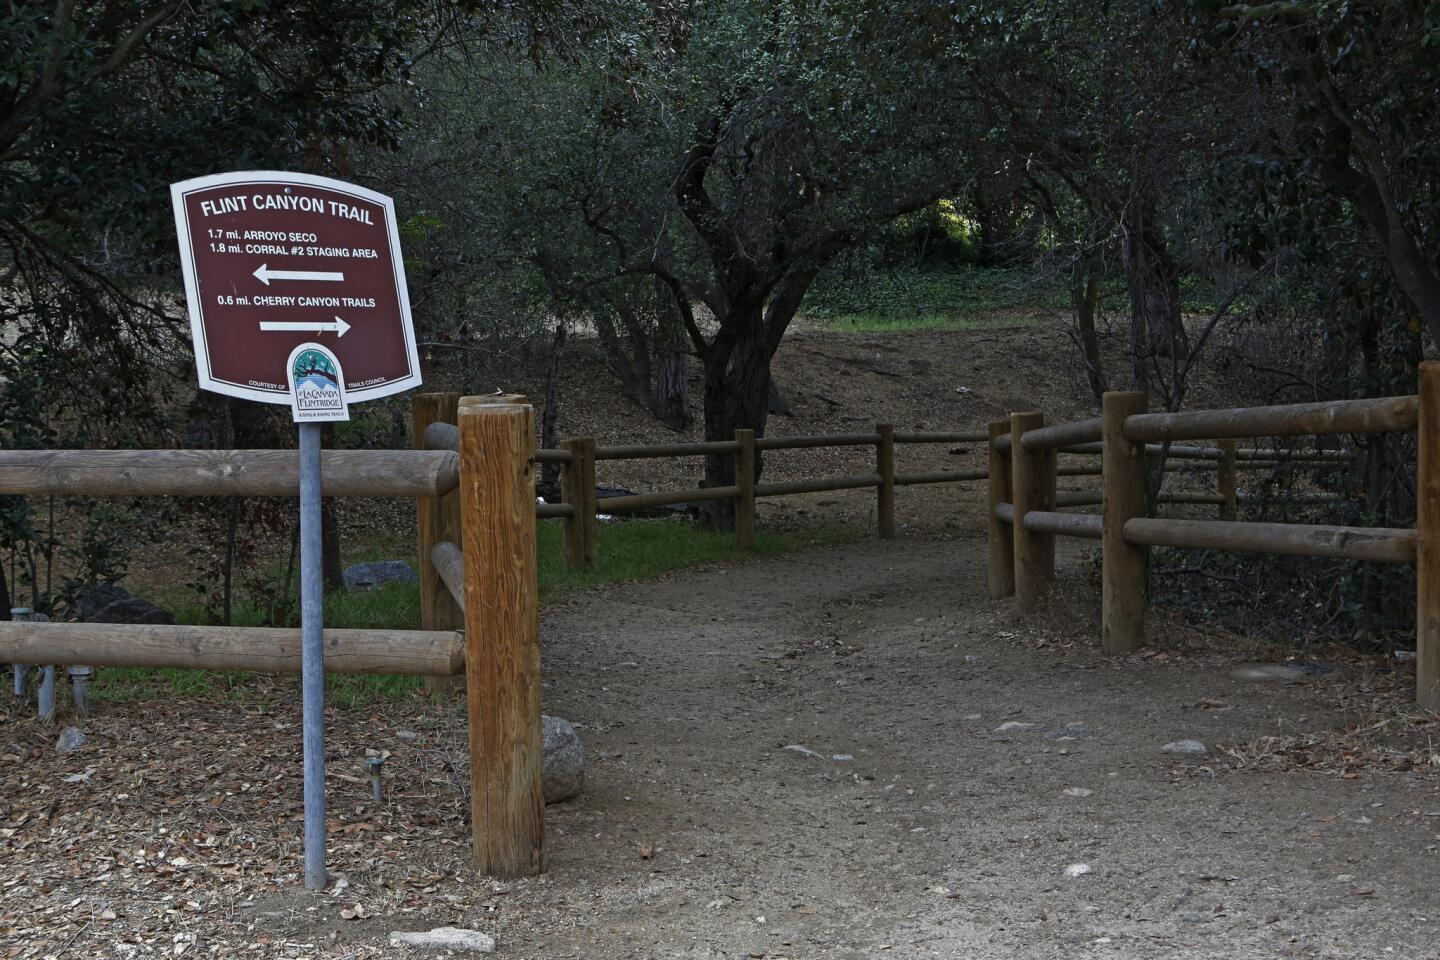 A section of trail starting on Woodleigh Lane in La Canada Flintridge.